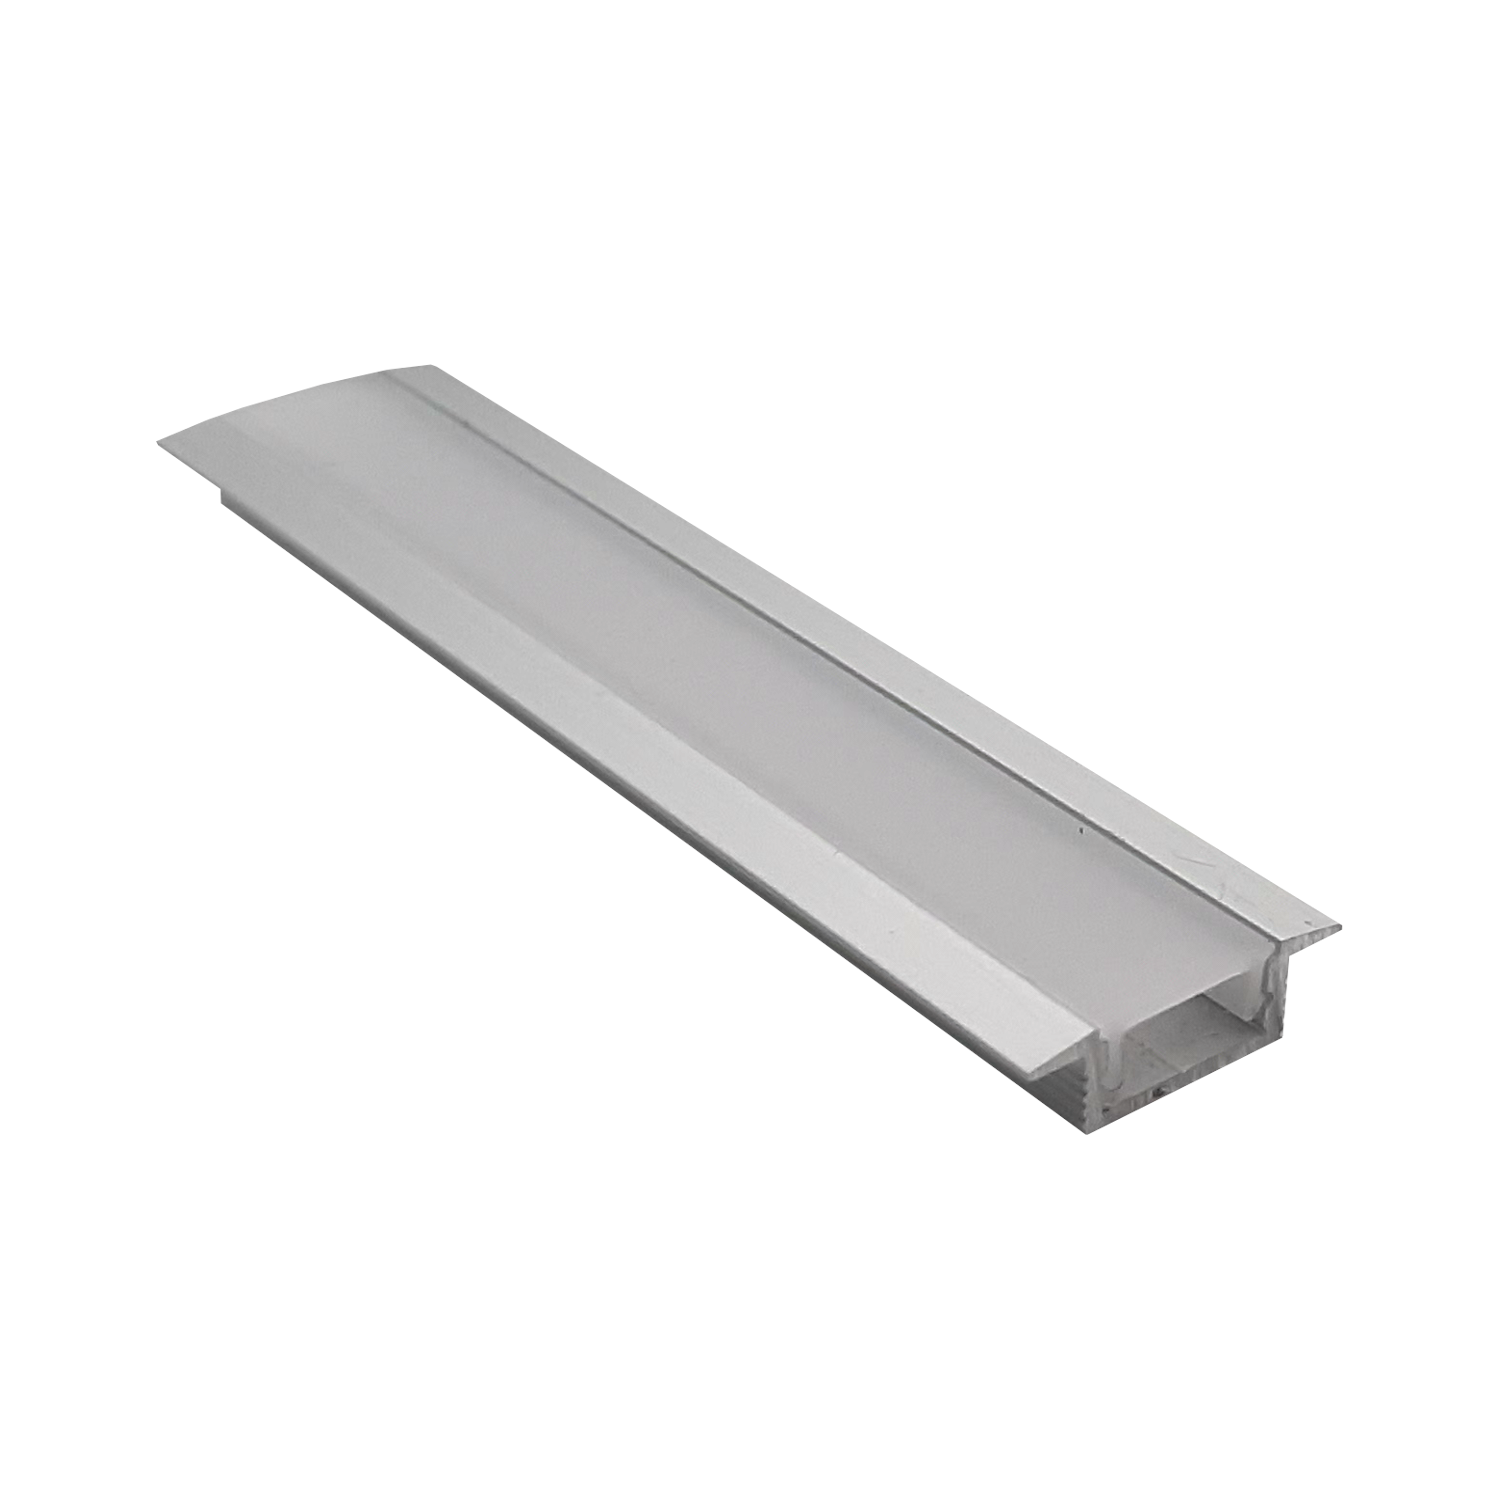 Product image of LXT13 Silver Shallow Extrusion with wings for LED Strip